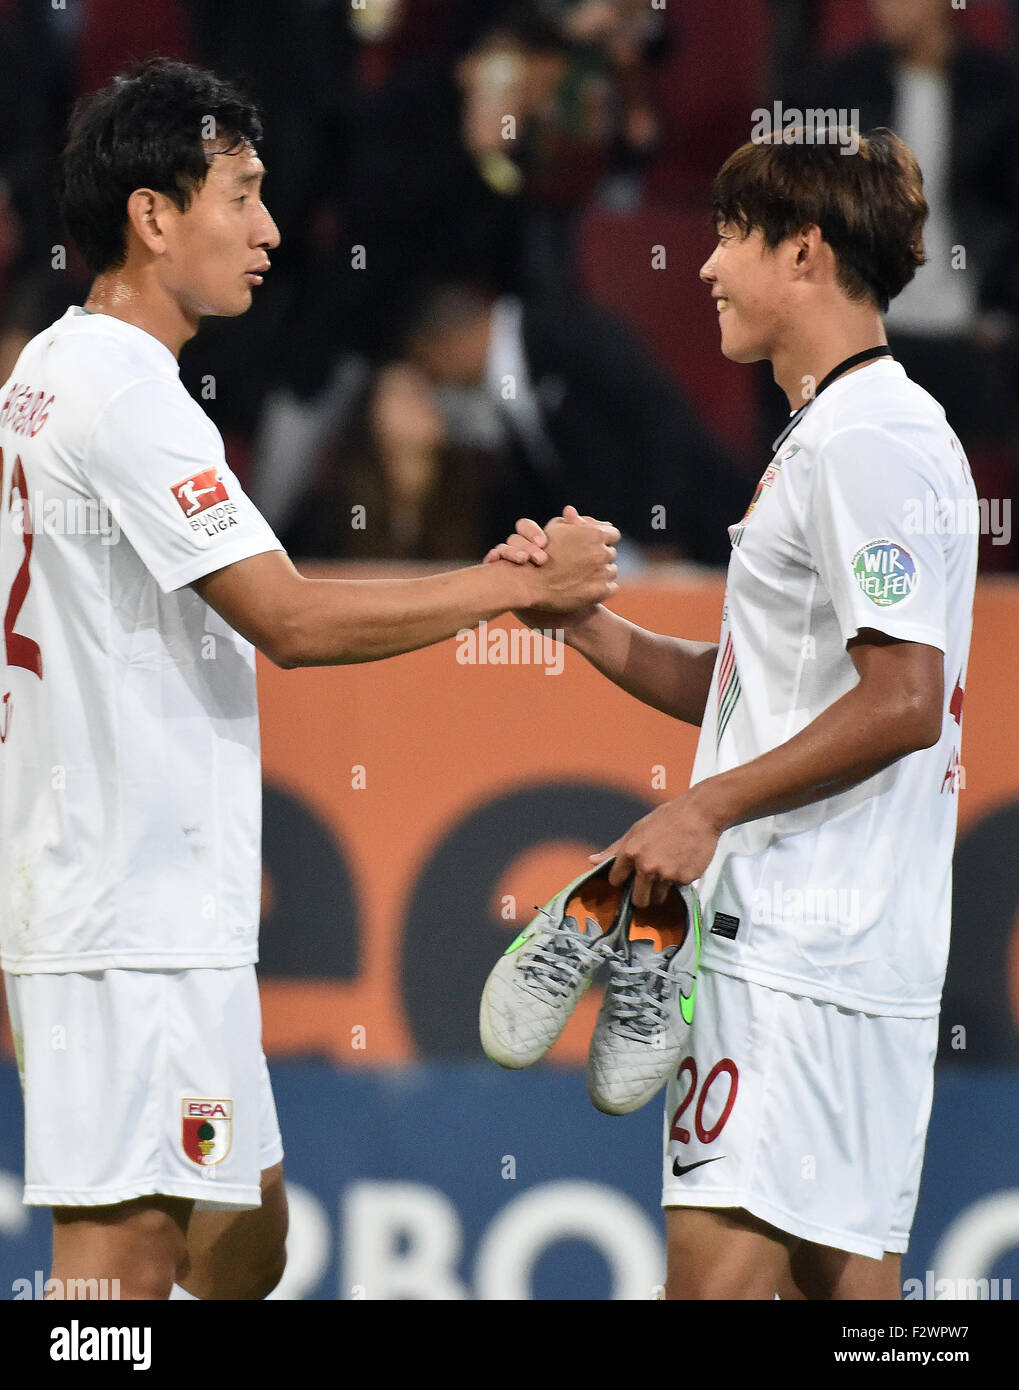 Augsburg, Germany. 20th Sep, 2015. Augsburg's Ji Dong-Won (l) and Hong Jeong-Ho celebrate their team's 2-0 victory after the German Bundesliga soccer match between FC Augsburg and Hannover 96 in Augsburg, Germany, 20 September 2015. Photo: Stefan Puchner/dpa/Alamy Live News Stock Photo